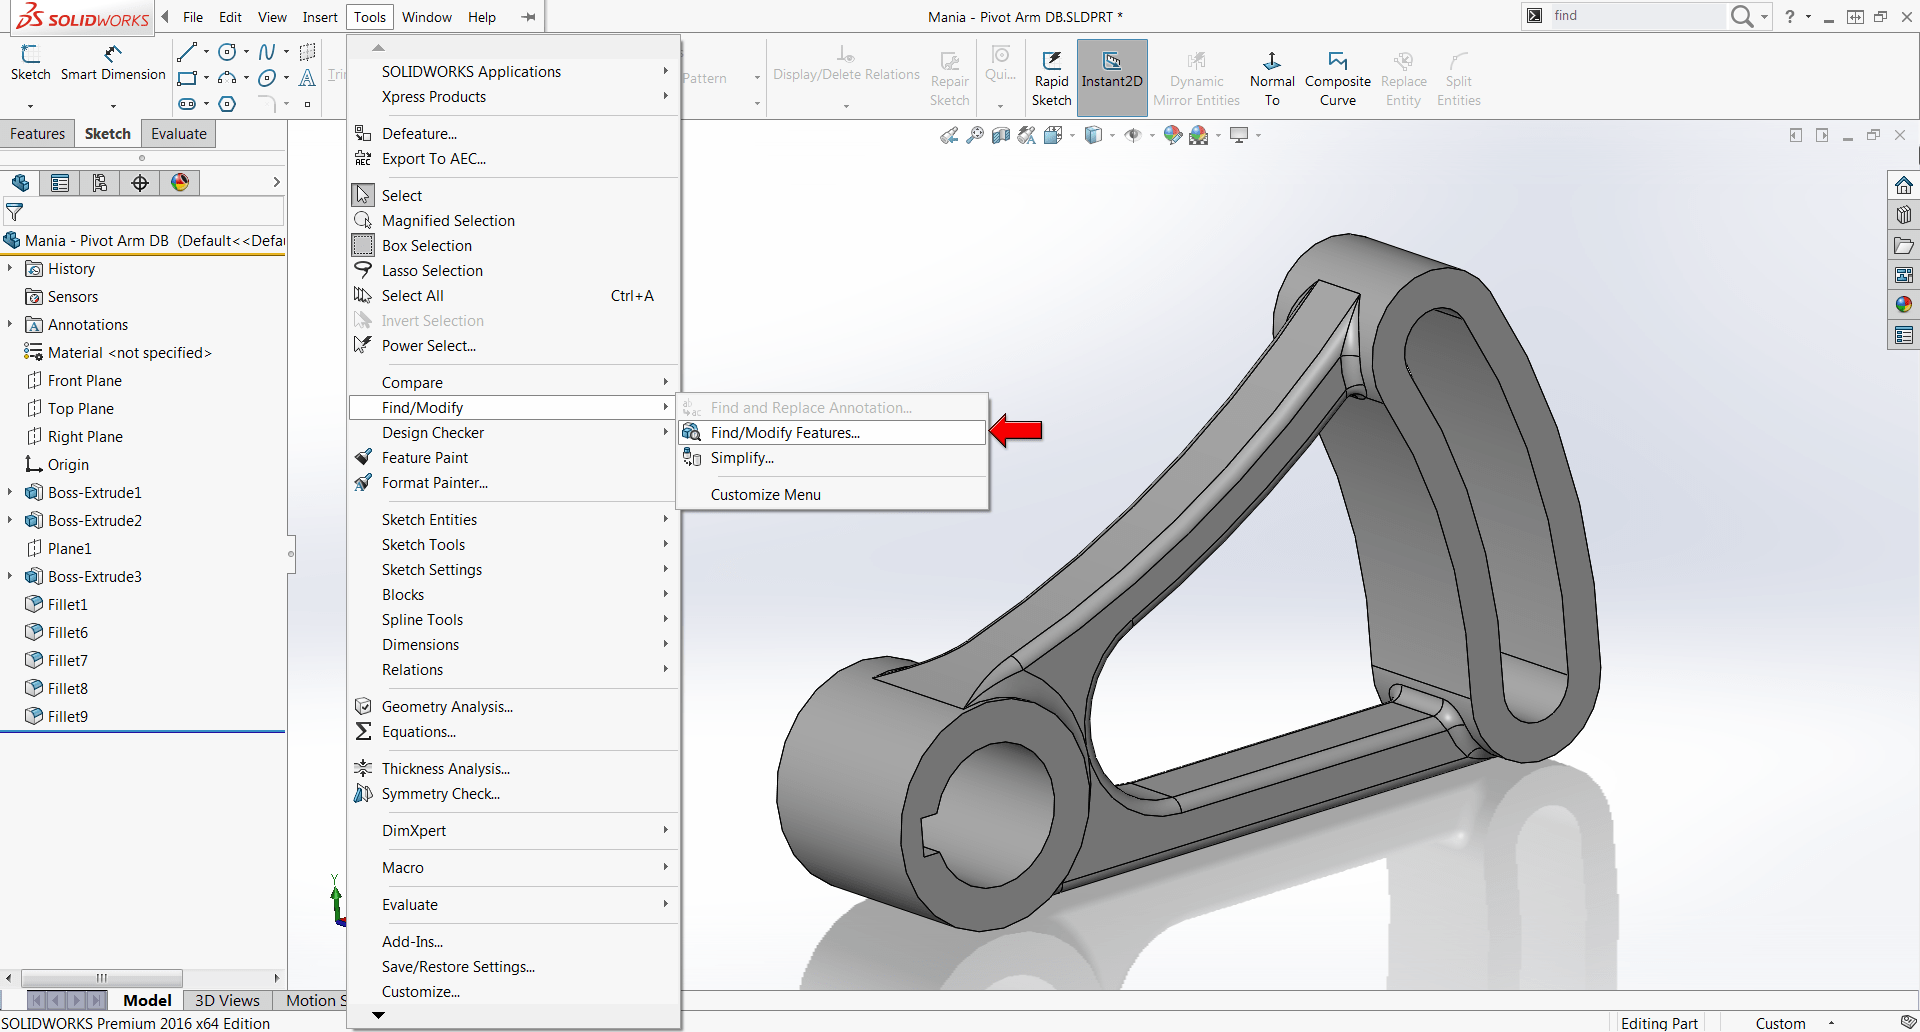 solidworks-findmodify-features-changing-multiple-features-at-onceimage002